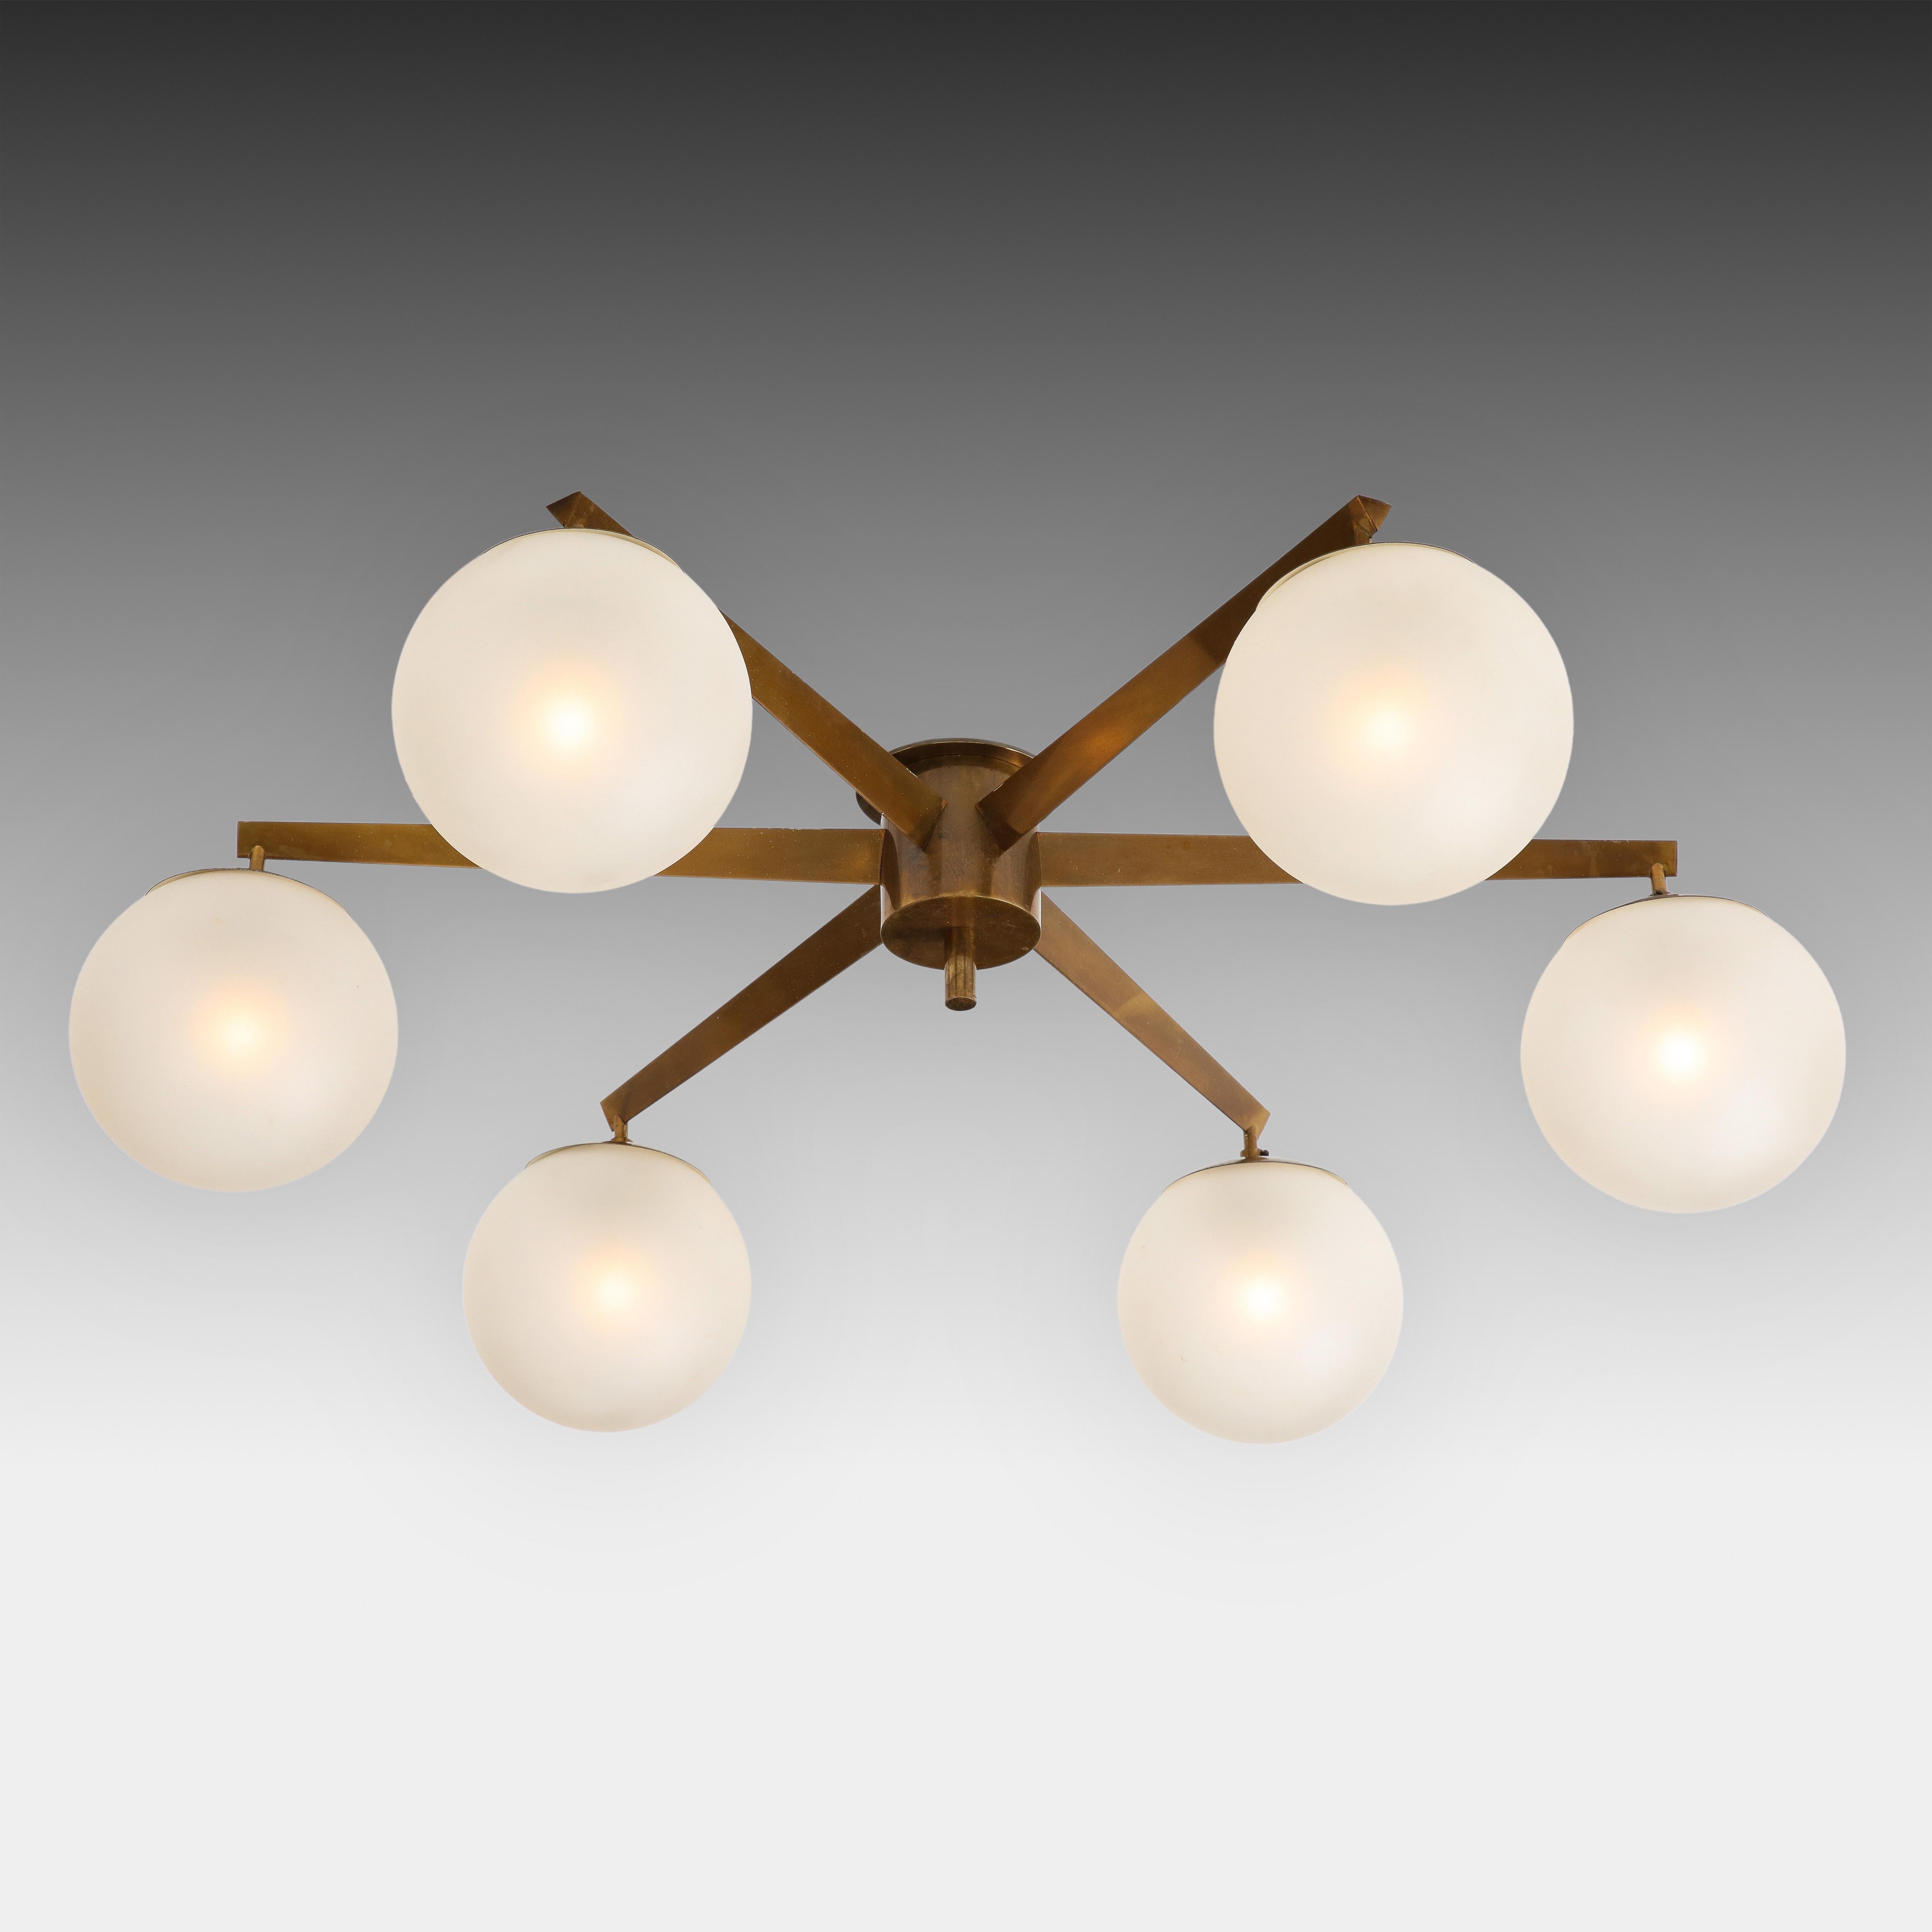 Angelo Lelli for Arredoluce rare original Stella a 6 chandelier or flush mount ceiling light with six satin or acid-etched glass globe shades suspended from brass structure in a starburst shape and mount, Italy, circa 1959.  This rare Stella a 6